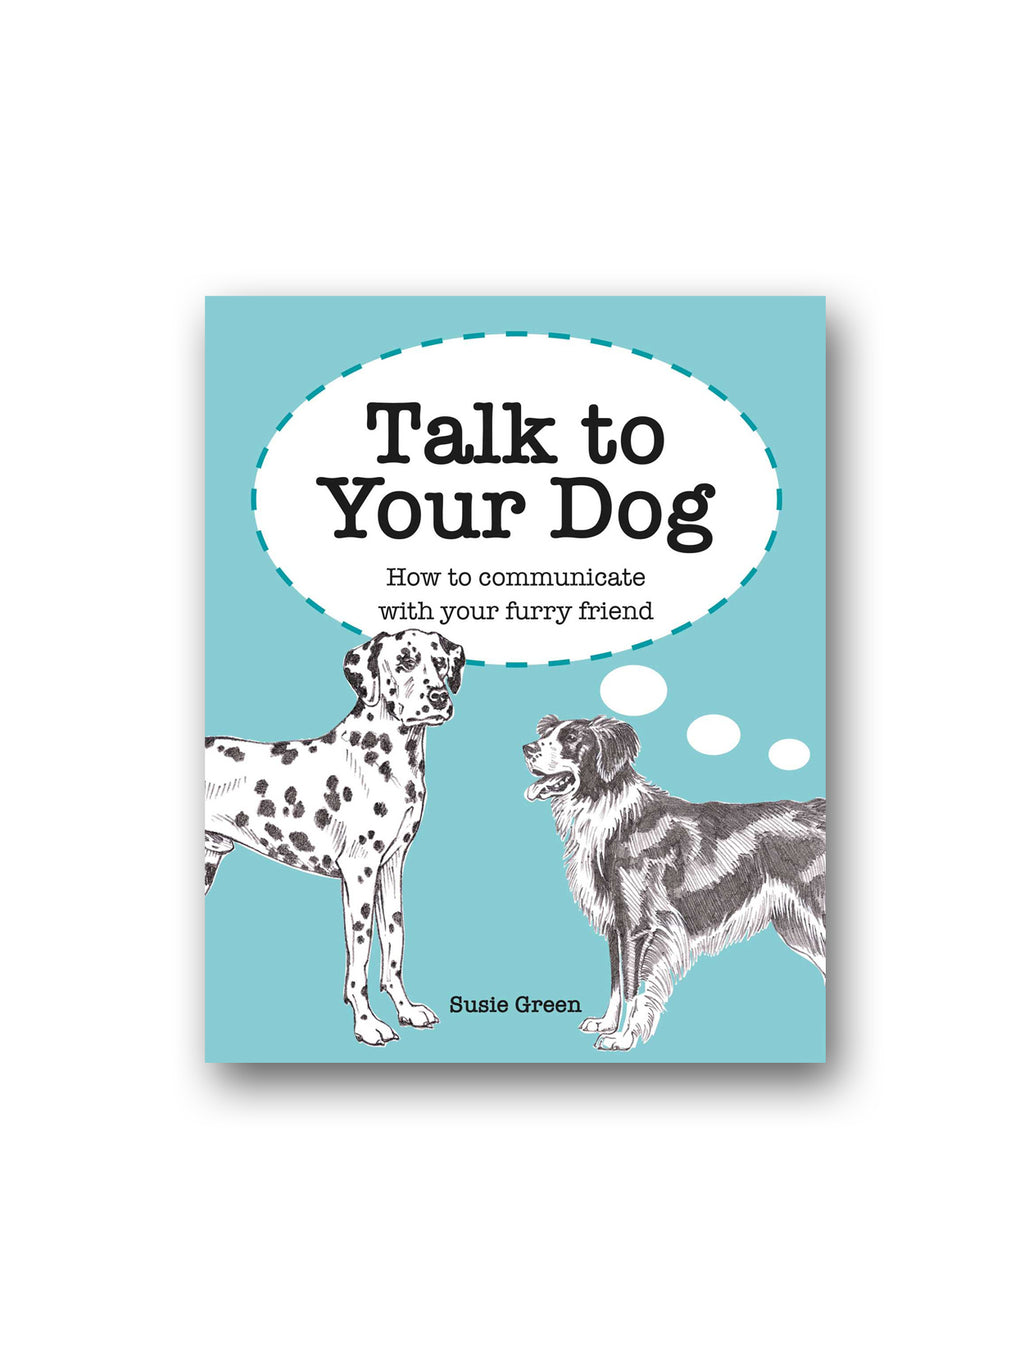 Talk to Your Dog